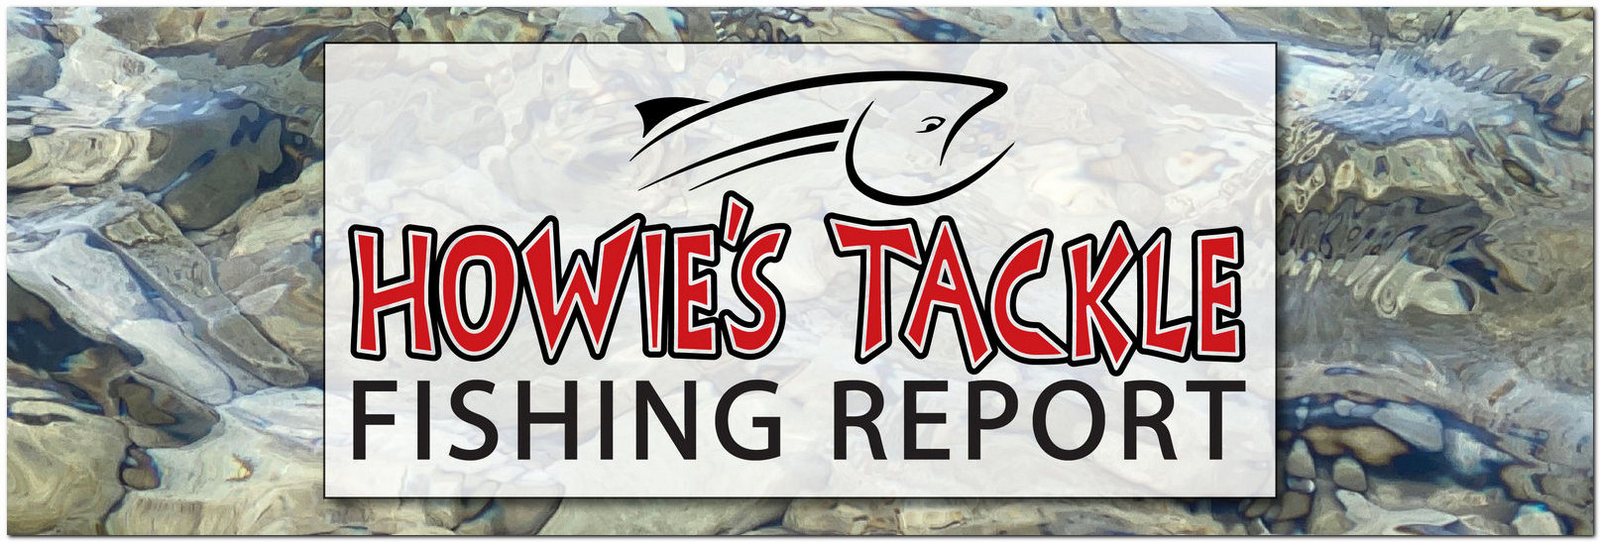 Image for Howie's Tackle Fishing Report